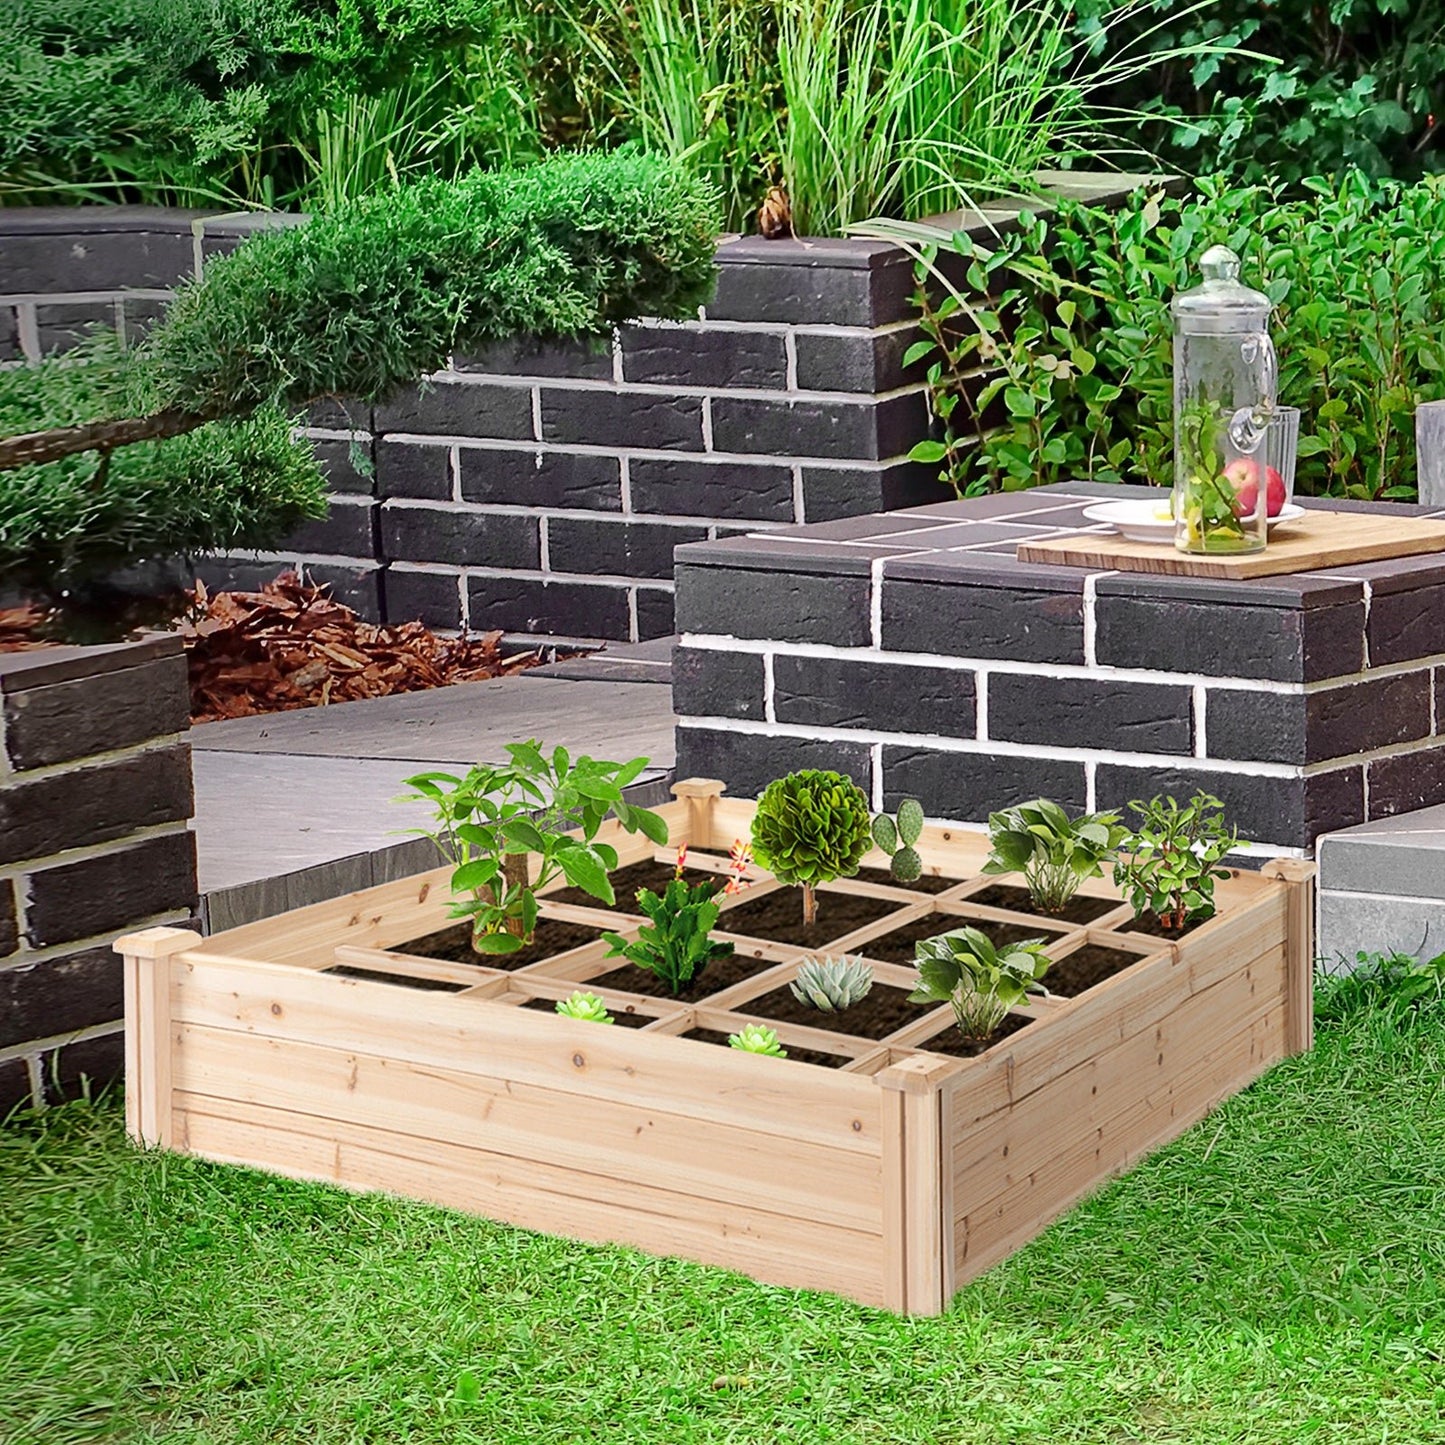 Outdoor and Garden-Raised Garden Bed 3.9Ft X 3.9Ft Backyard Plant Bed Box With Segmented Growing Grid Wood Material For Plants & Herbs - Outdoor Style Company